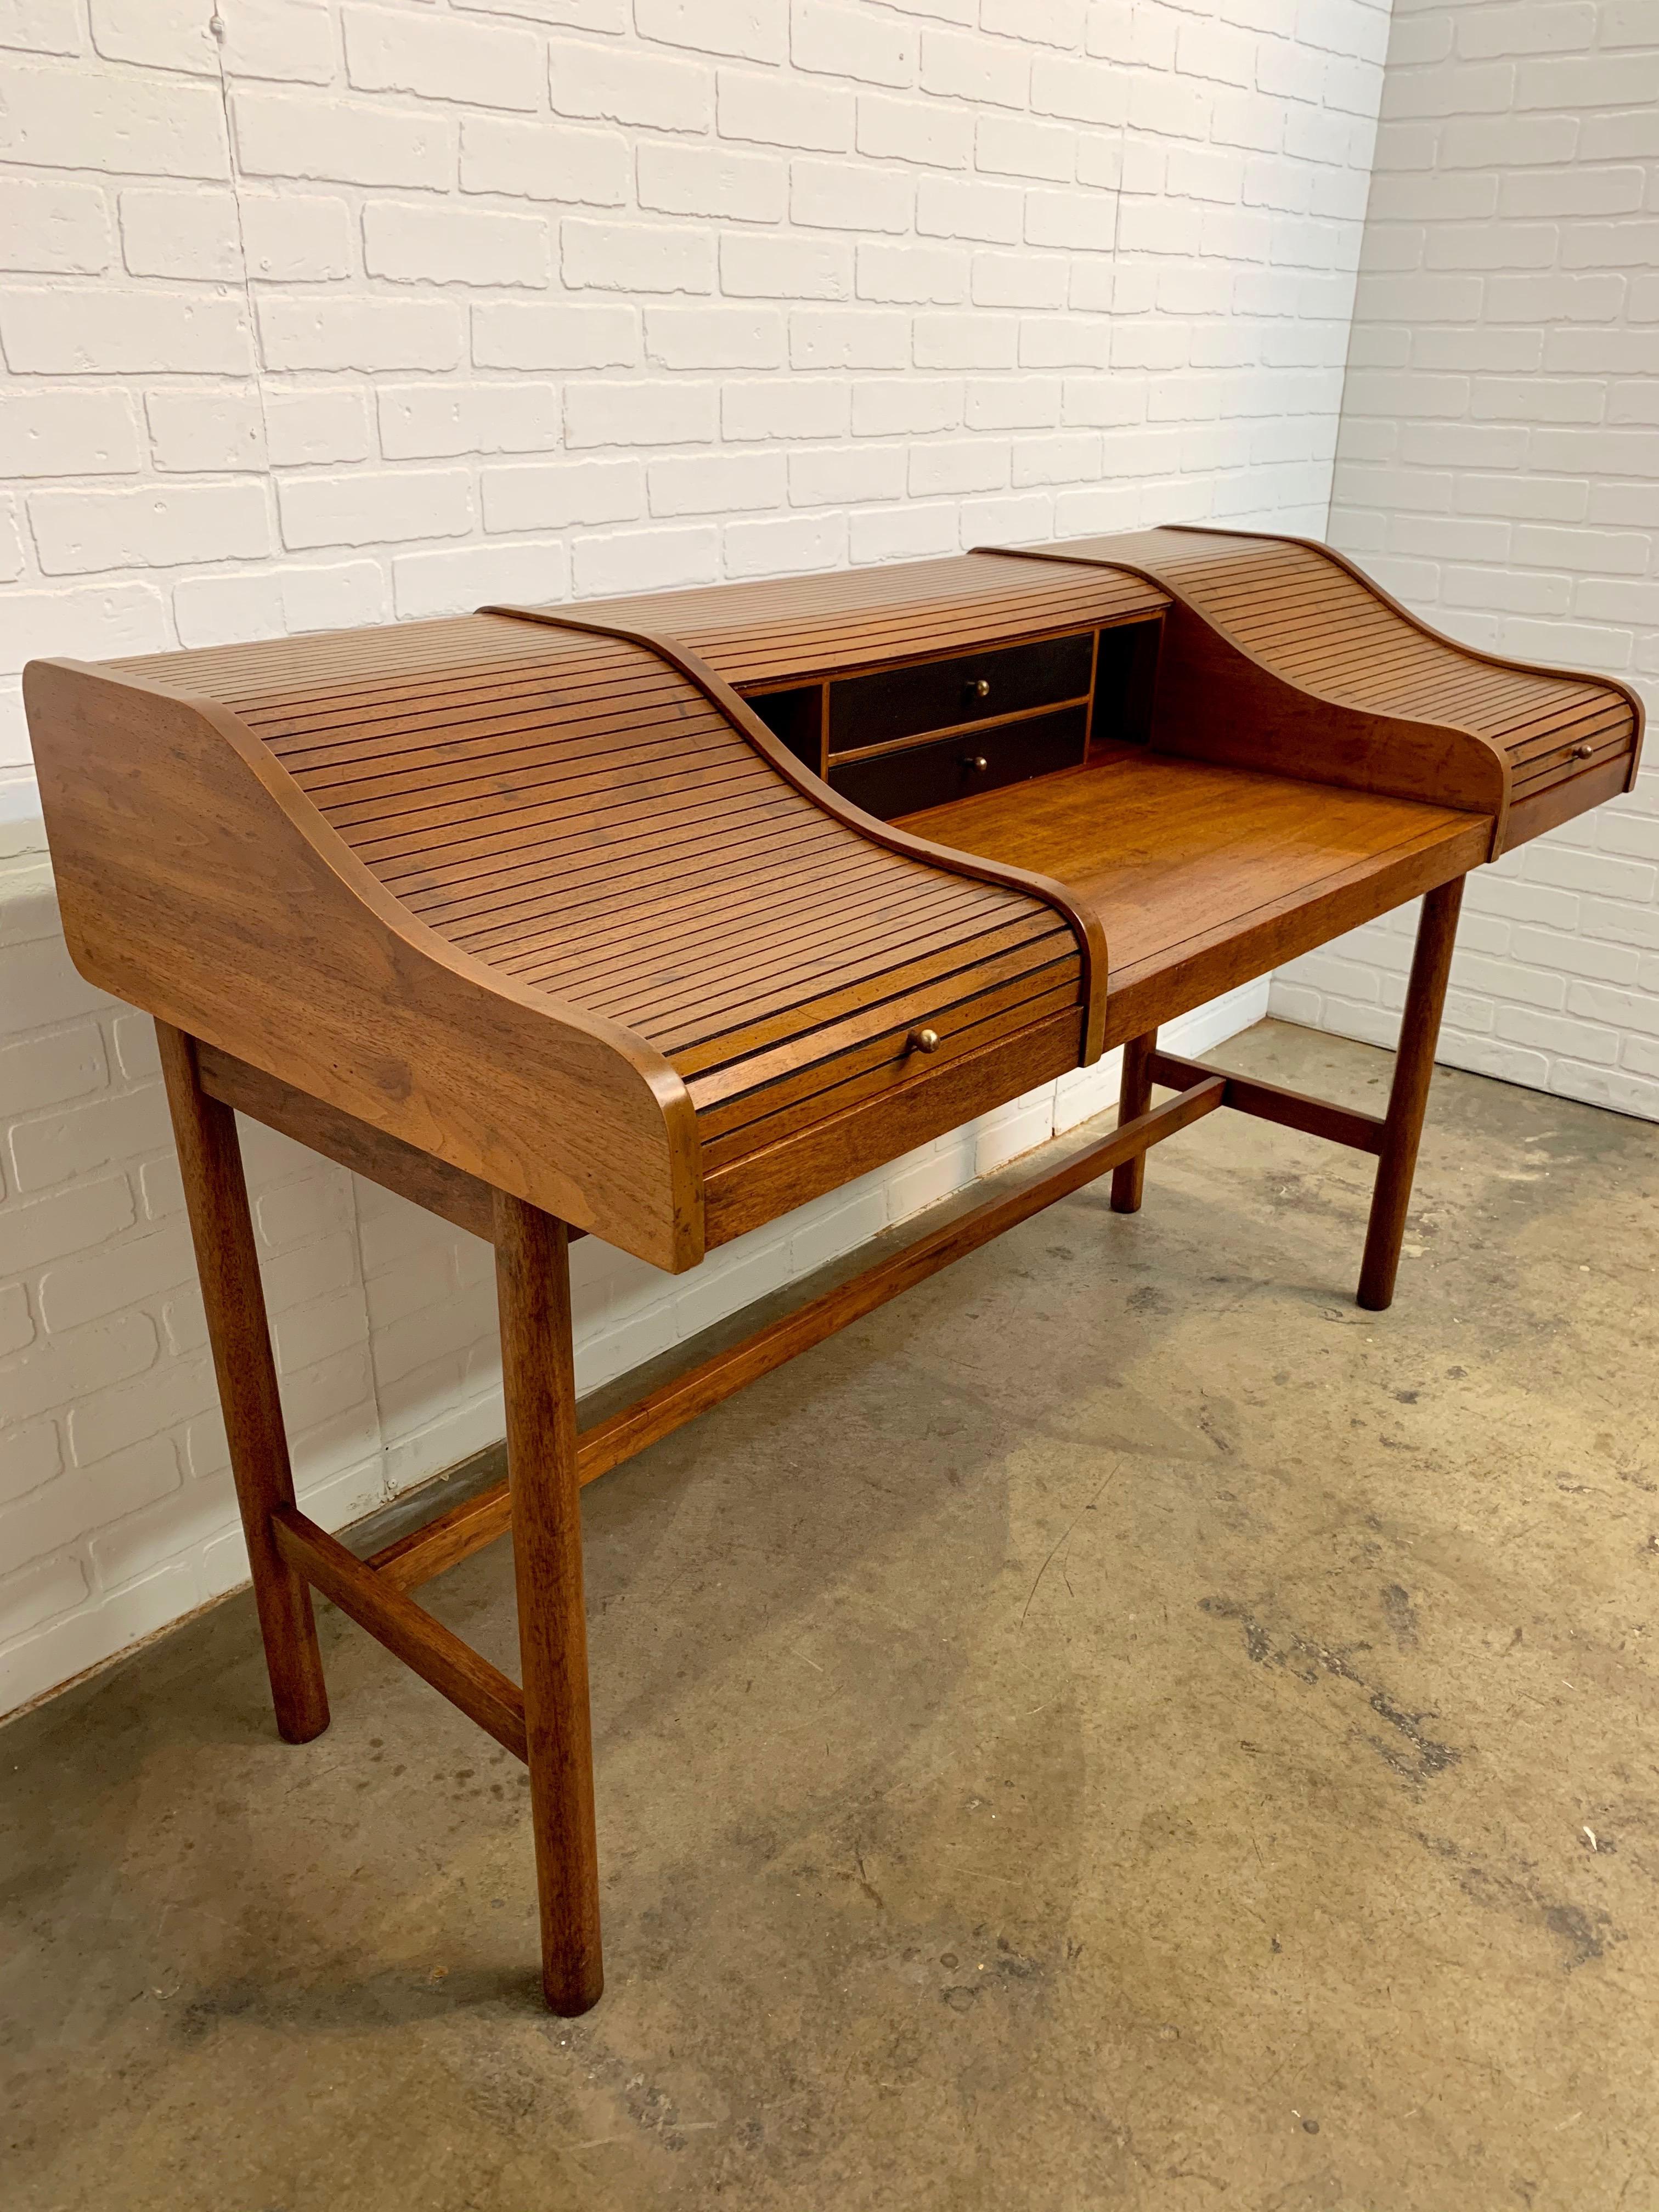 Beautiful modernist desk with two separate tambour sections and center work space and ebonized interior drawer fronts 
attributed to Edward Wormely.